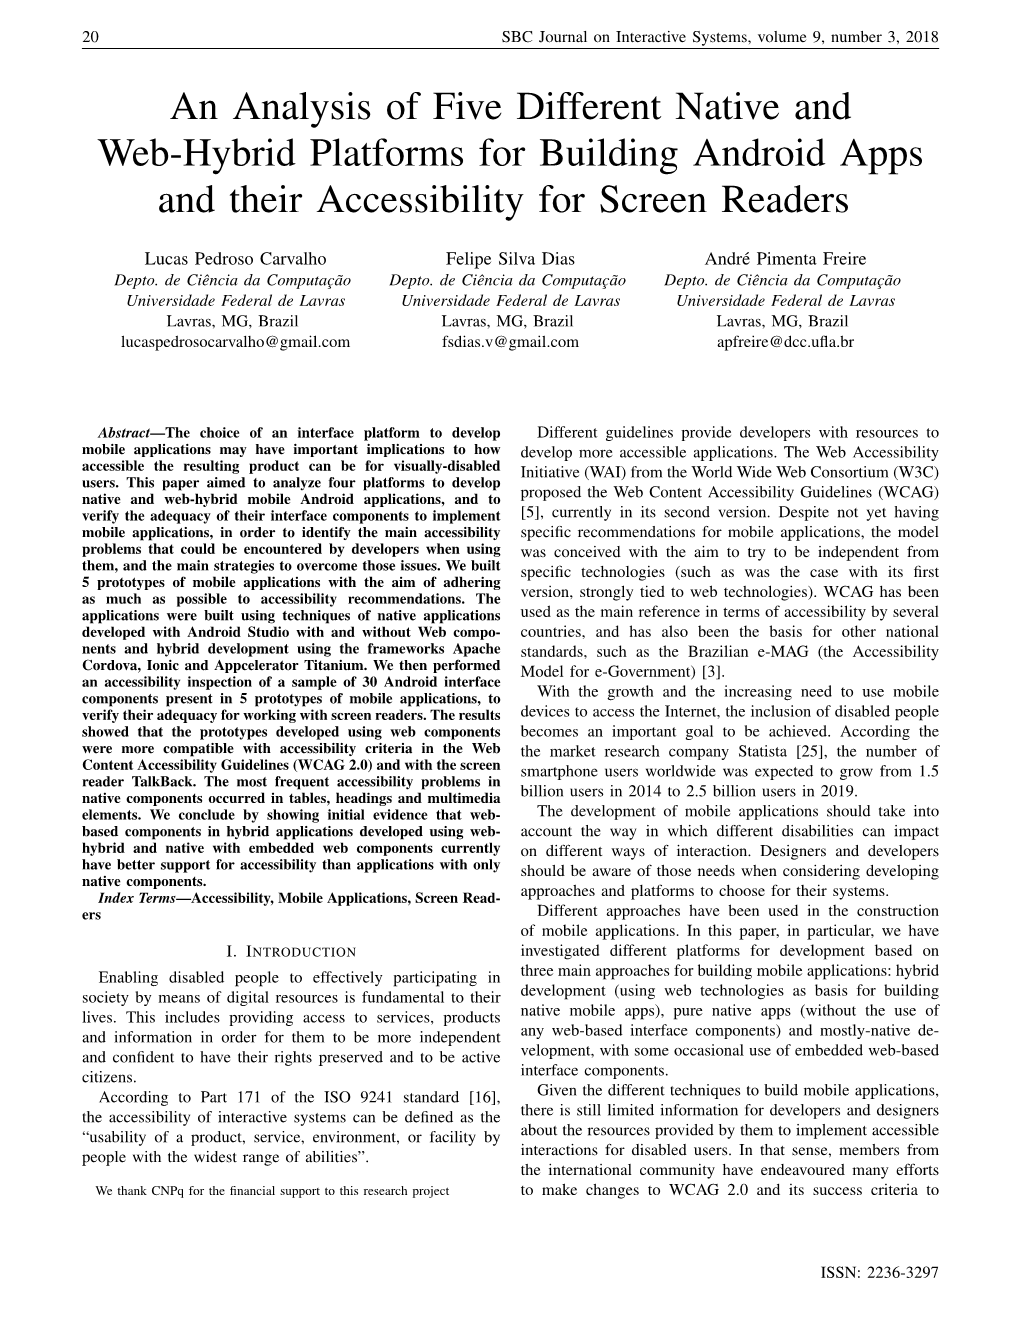 An Analysis of Five Different Native and Web-Hybrid Platforms for Building Android Apps and Their Accessibility for Screen Readers